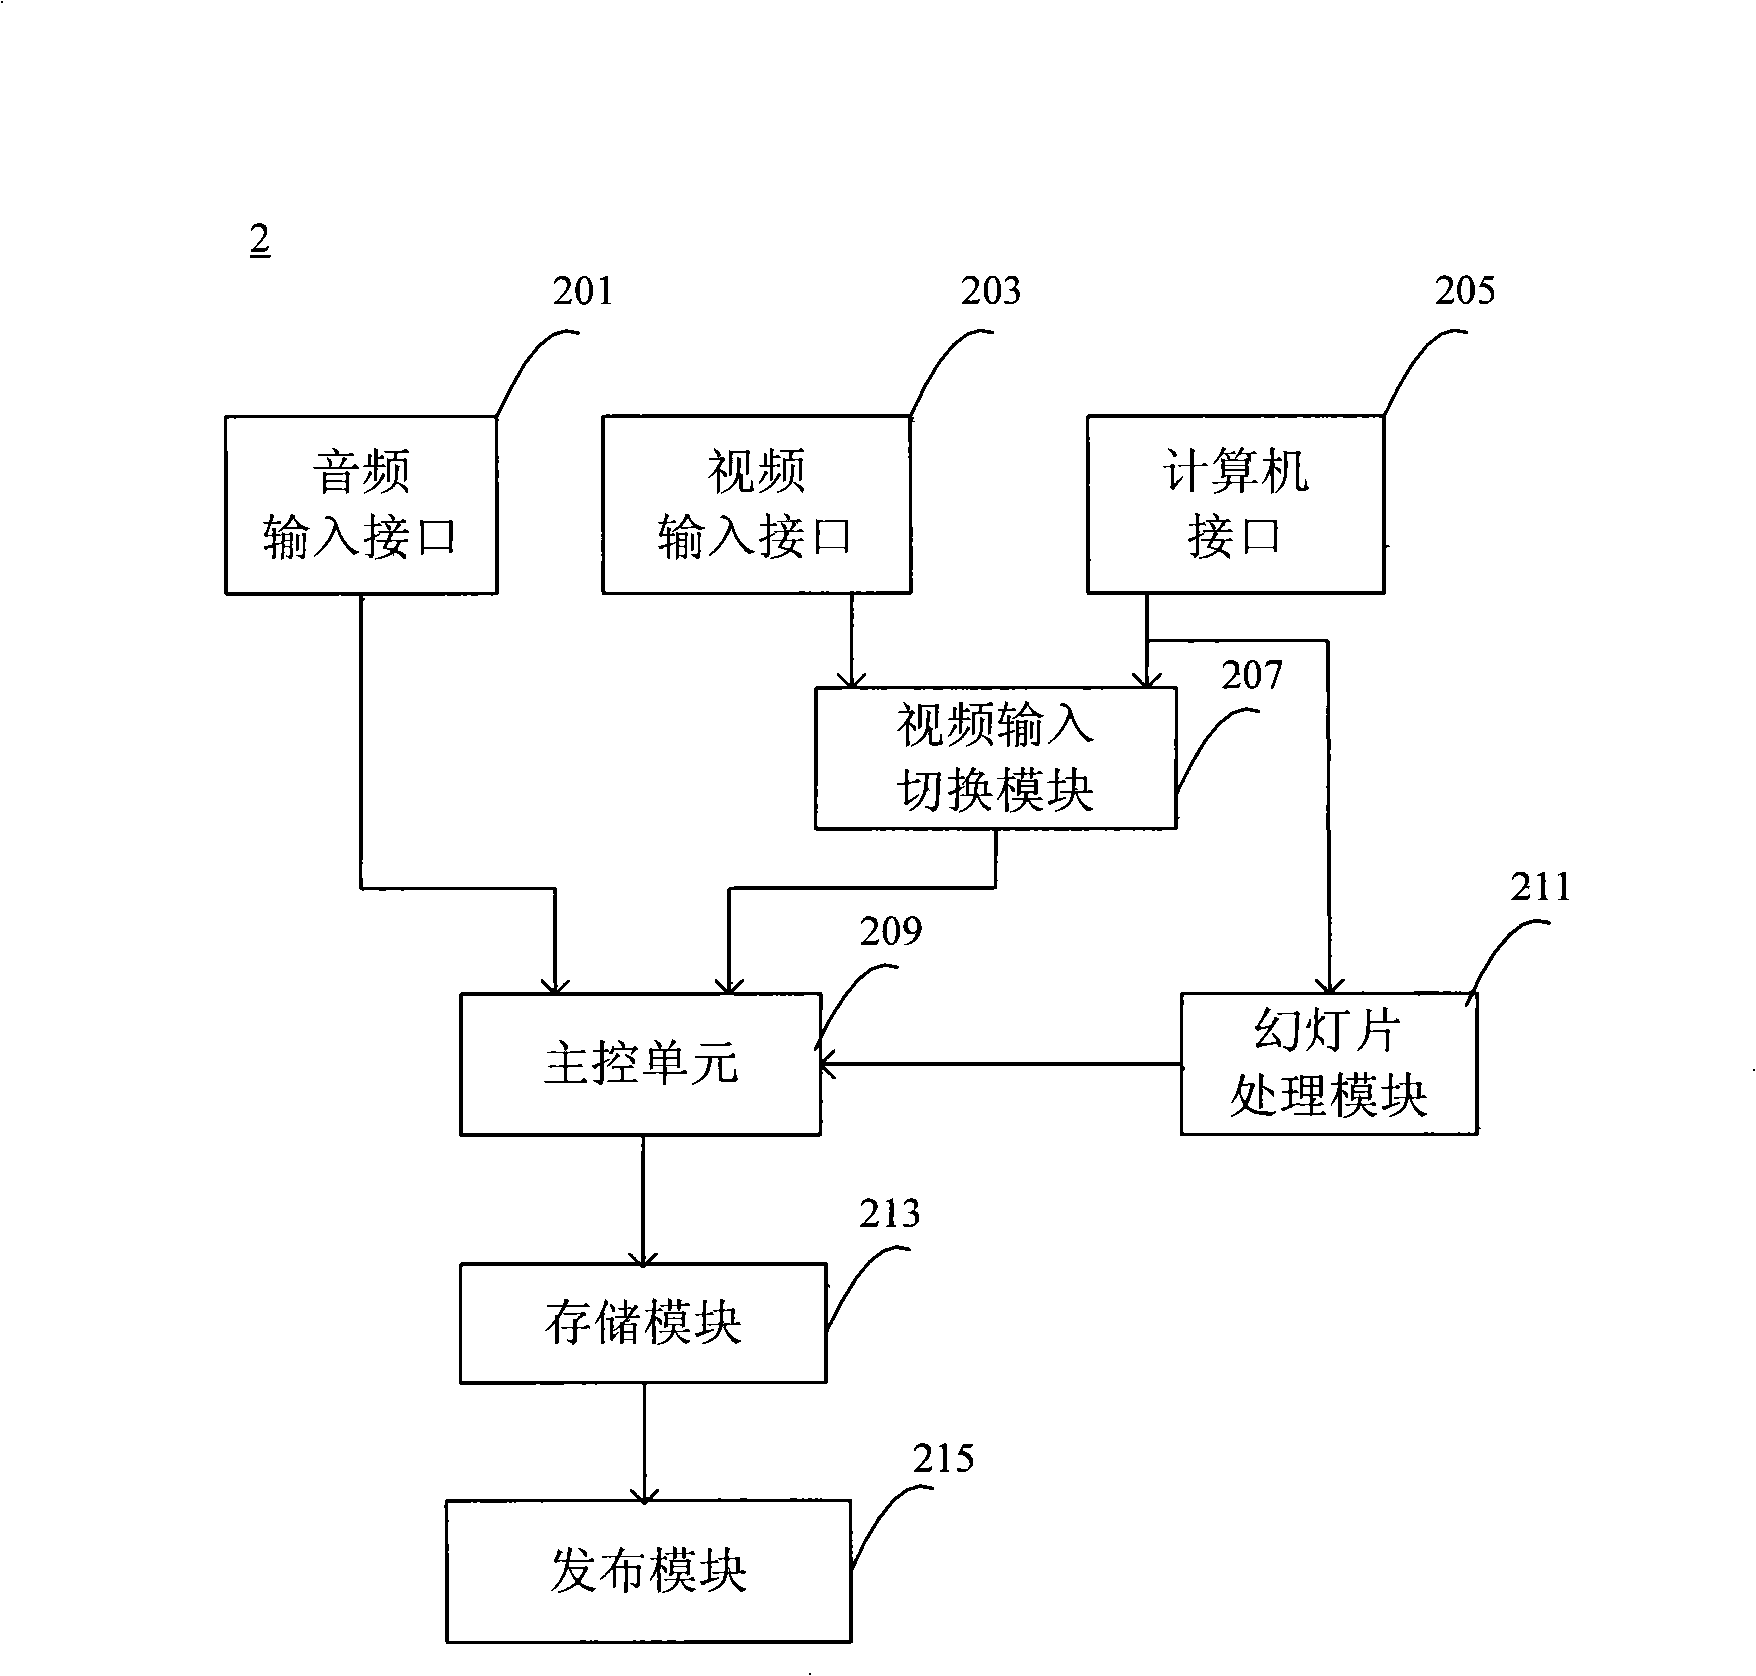 Recording system and method used for teaching and meeting place